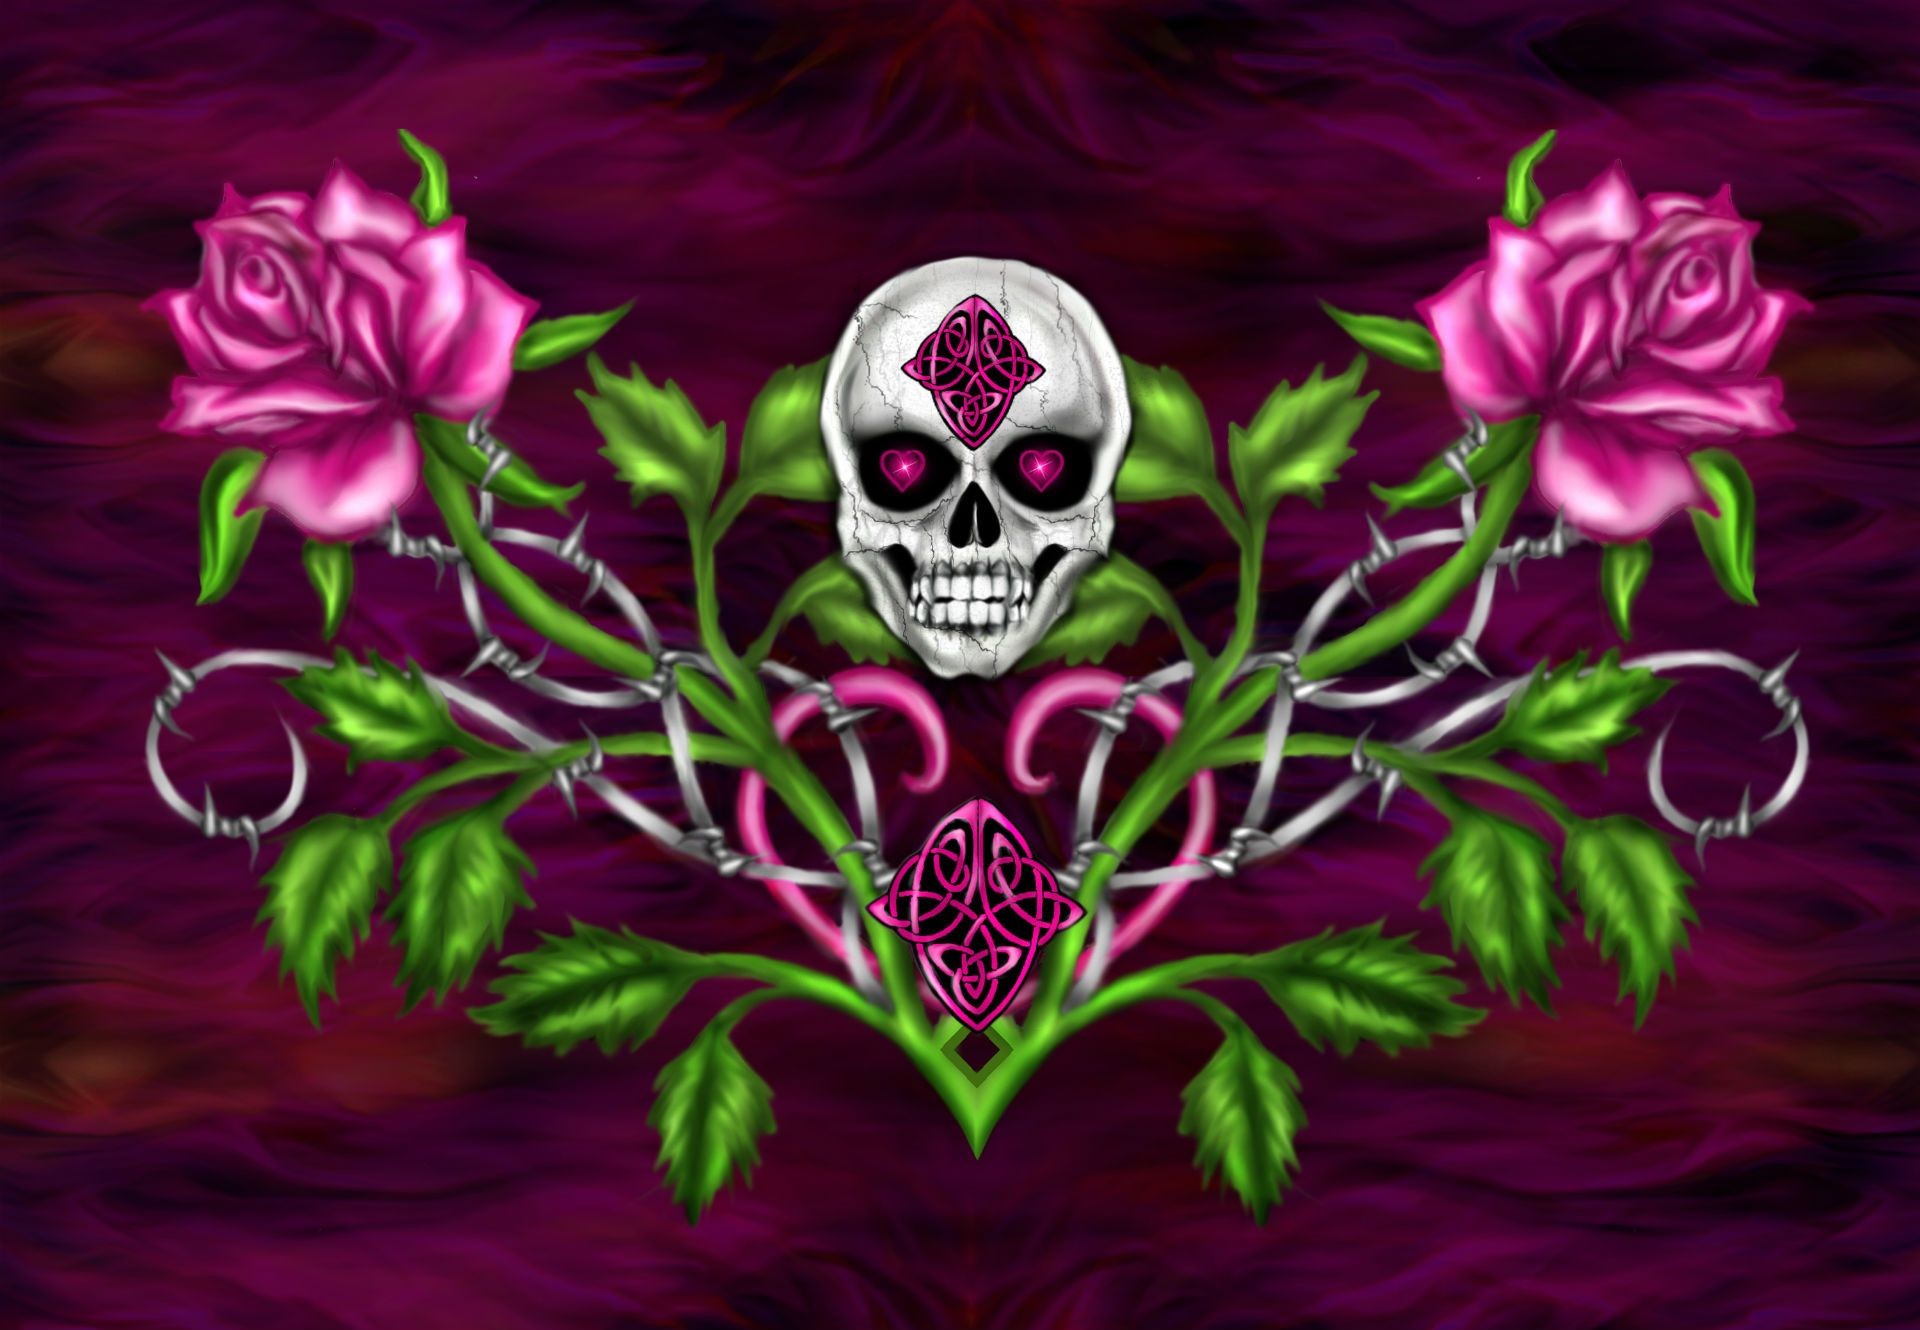 Gothic Skull, High Resolution Wallpapers For Free - Girly Skulls And Roses - HD Wallpaper 